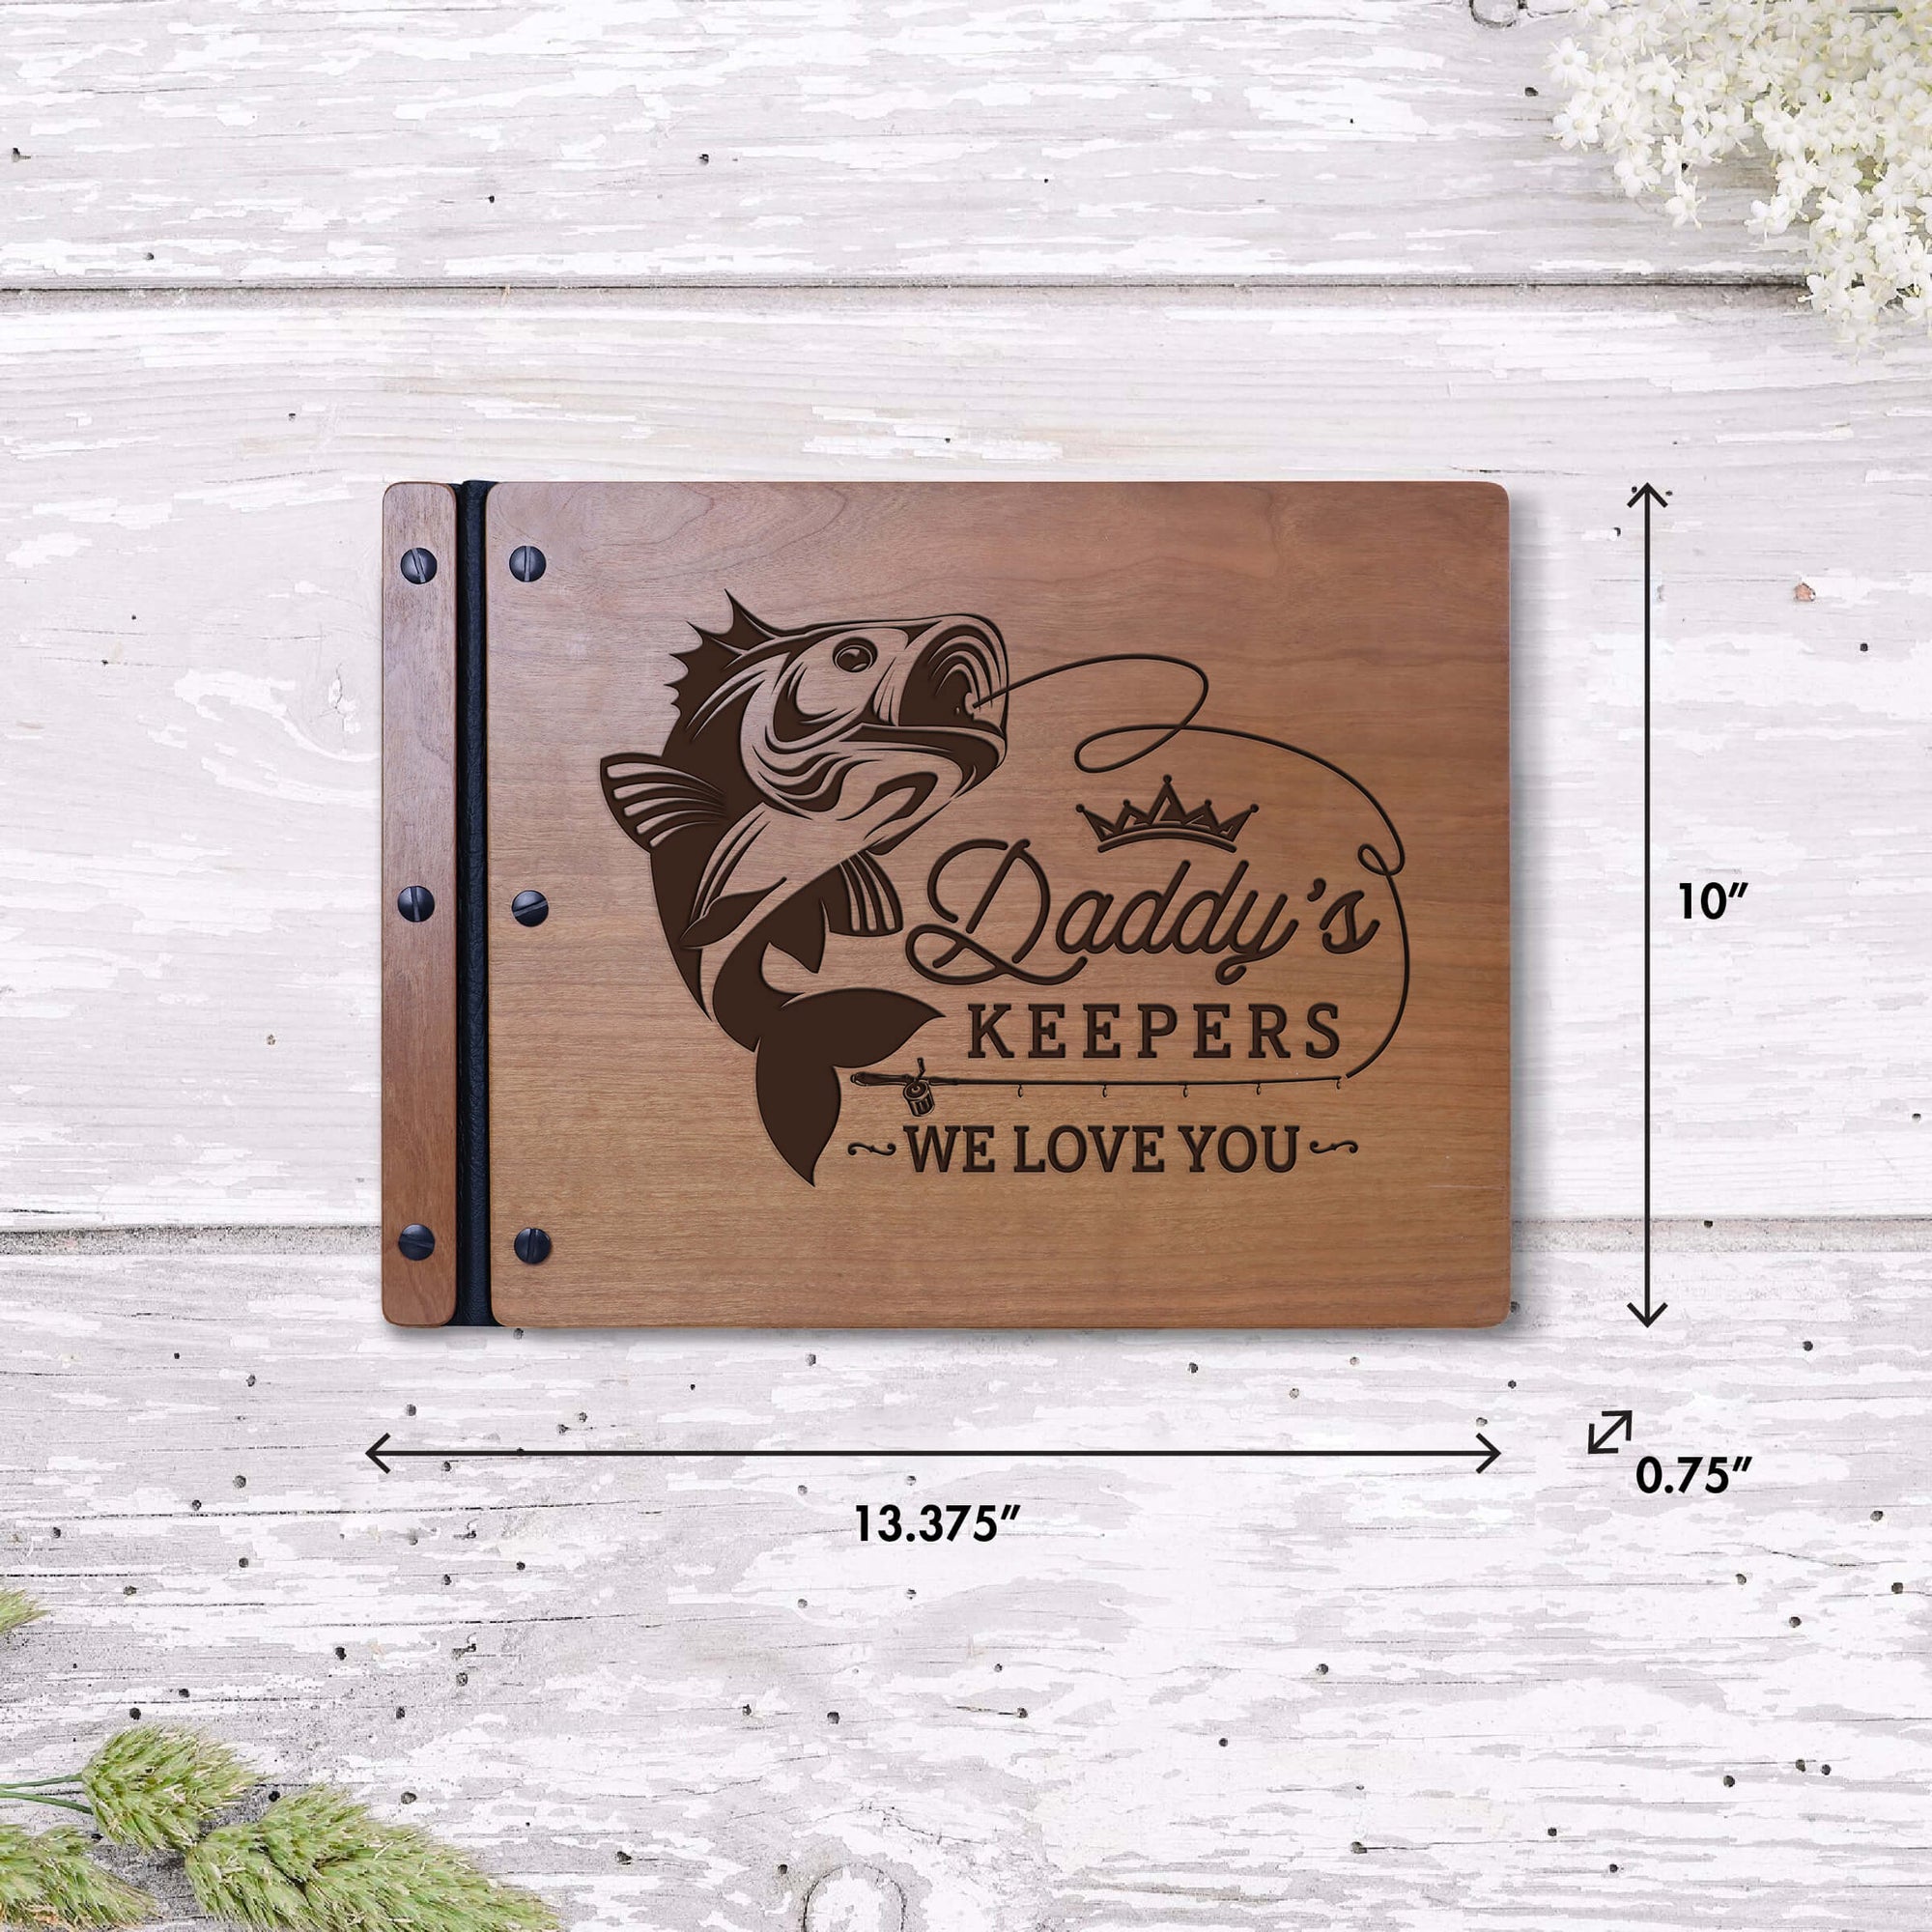 Wooden Memorial Large Guestbook with Fisherman Verse for Funeral Service - Daddy's Keepers